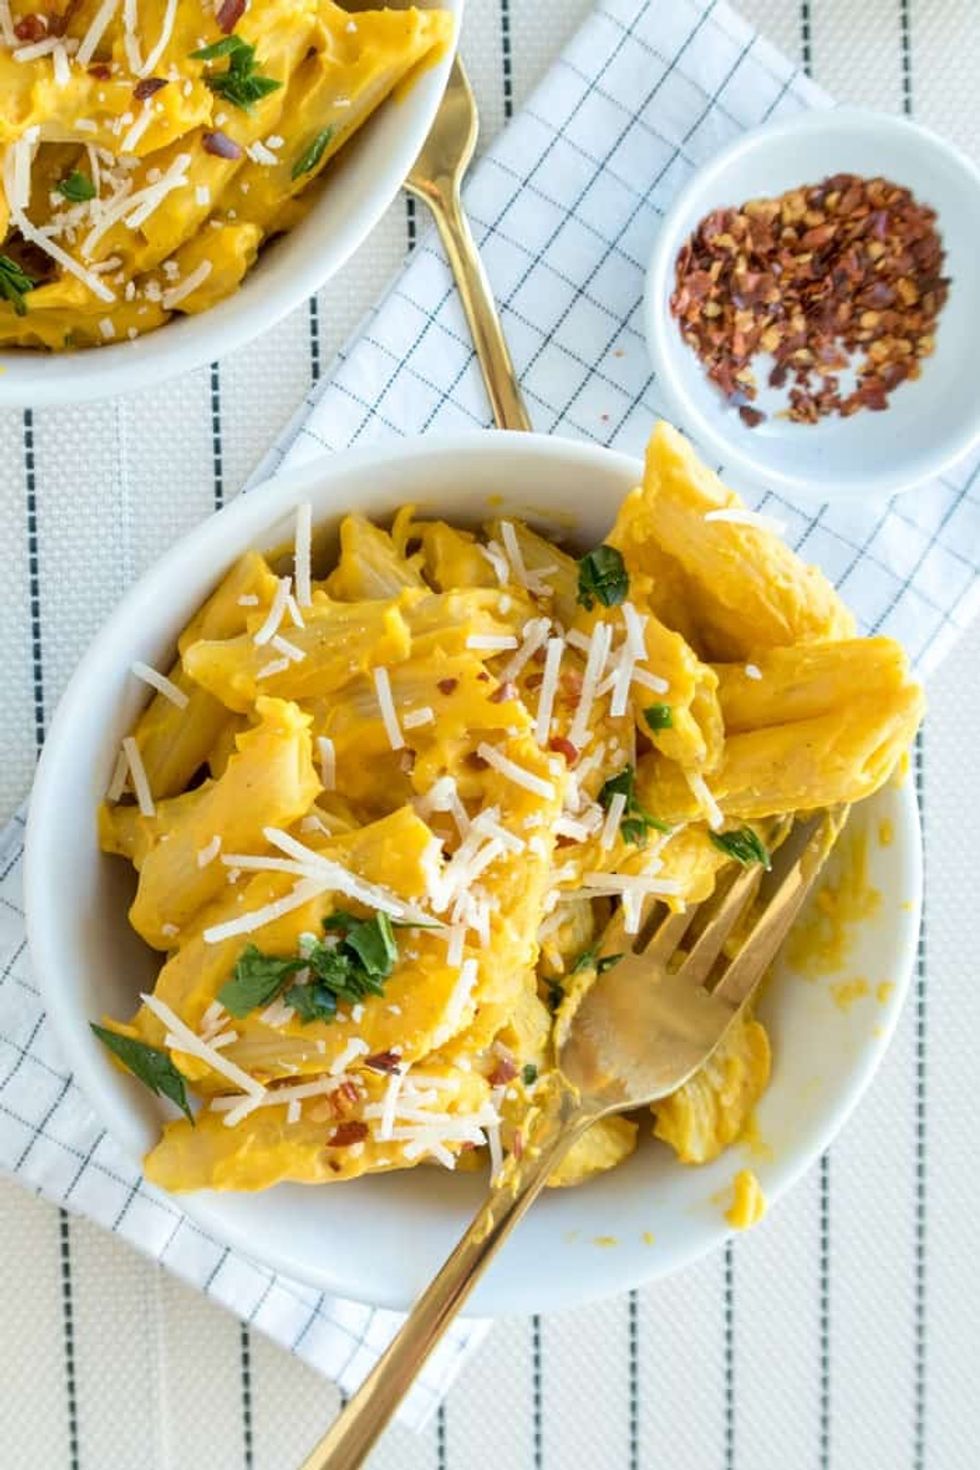 41 Of The Easiest Homemade Mac and Cheese Recipes - Brit + Co